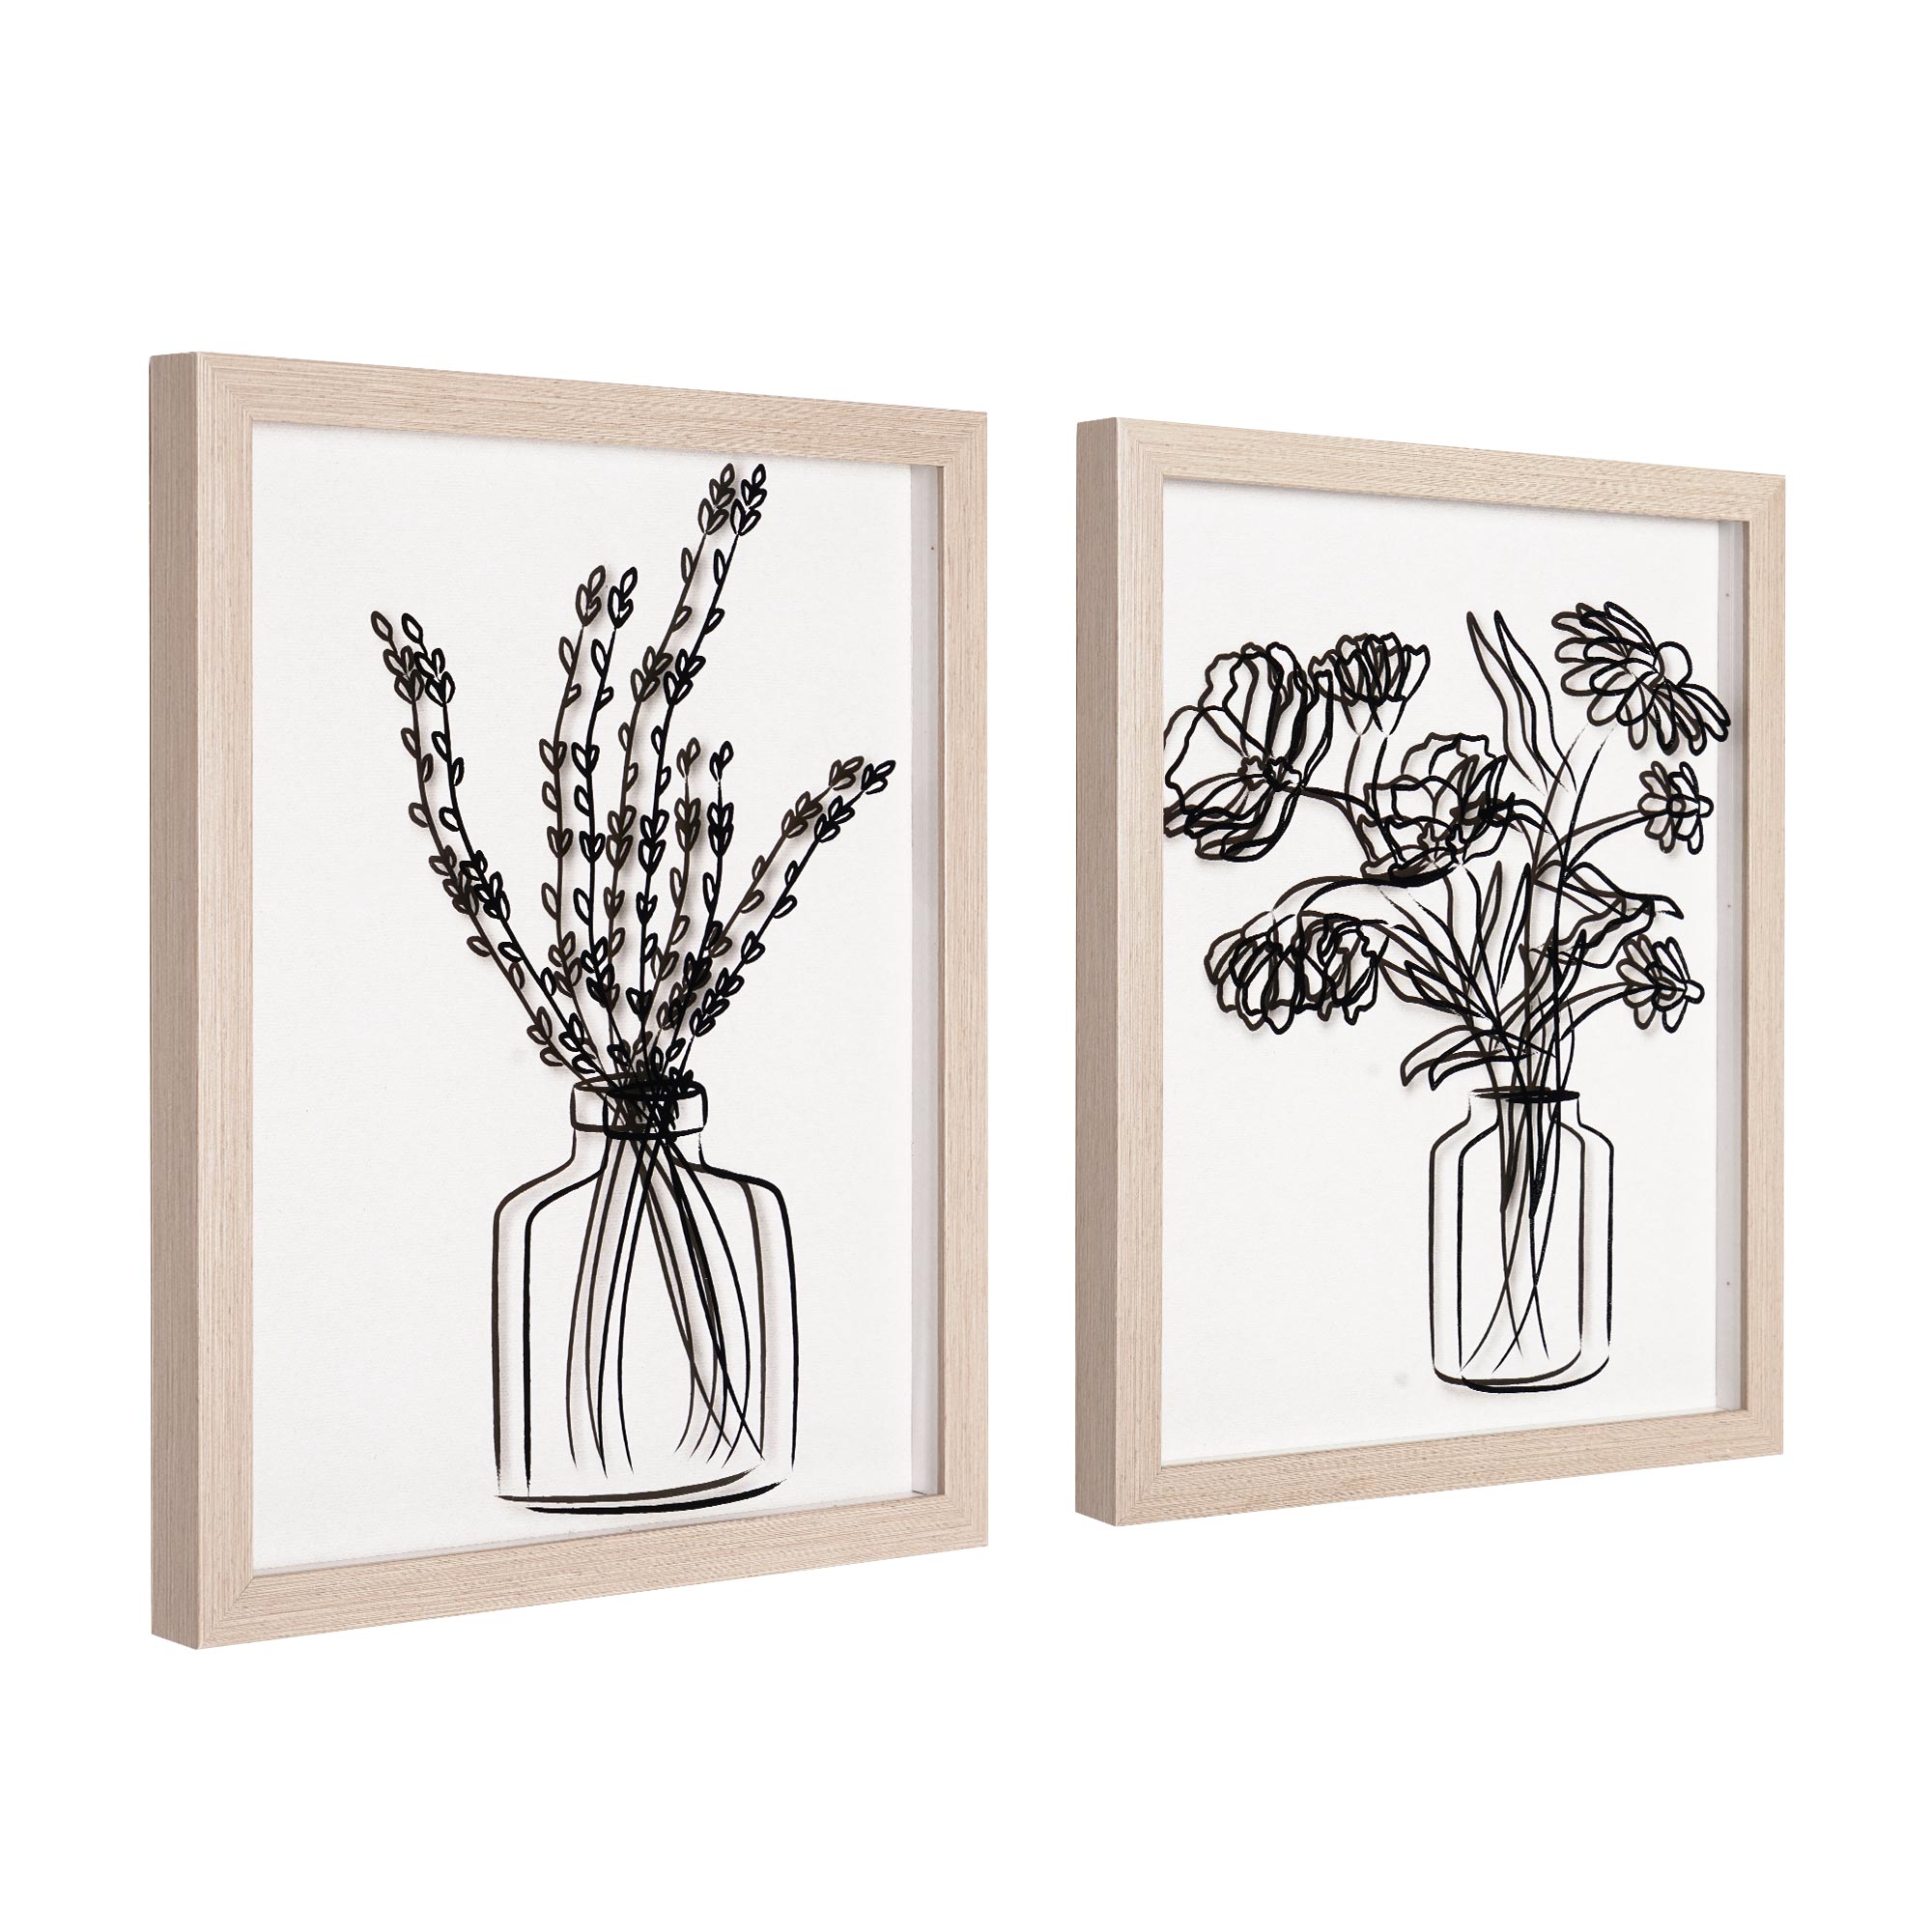 Crystal Art Gallery Florals in Vase Black Print on Clear Framed Wall Decor 11" x 14" Set of 2 - image 1 of 6